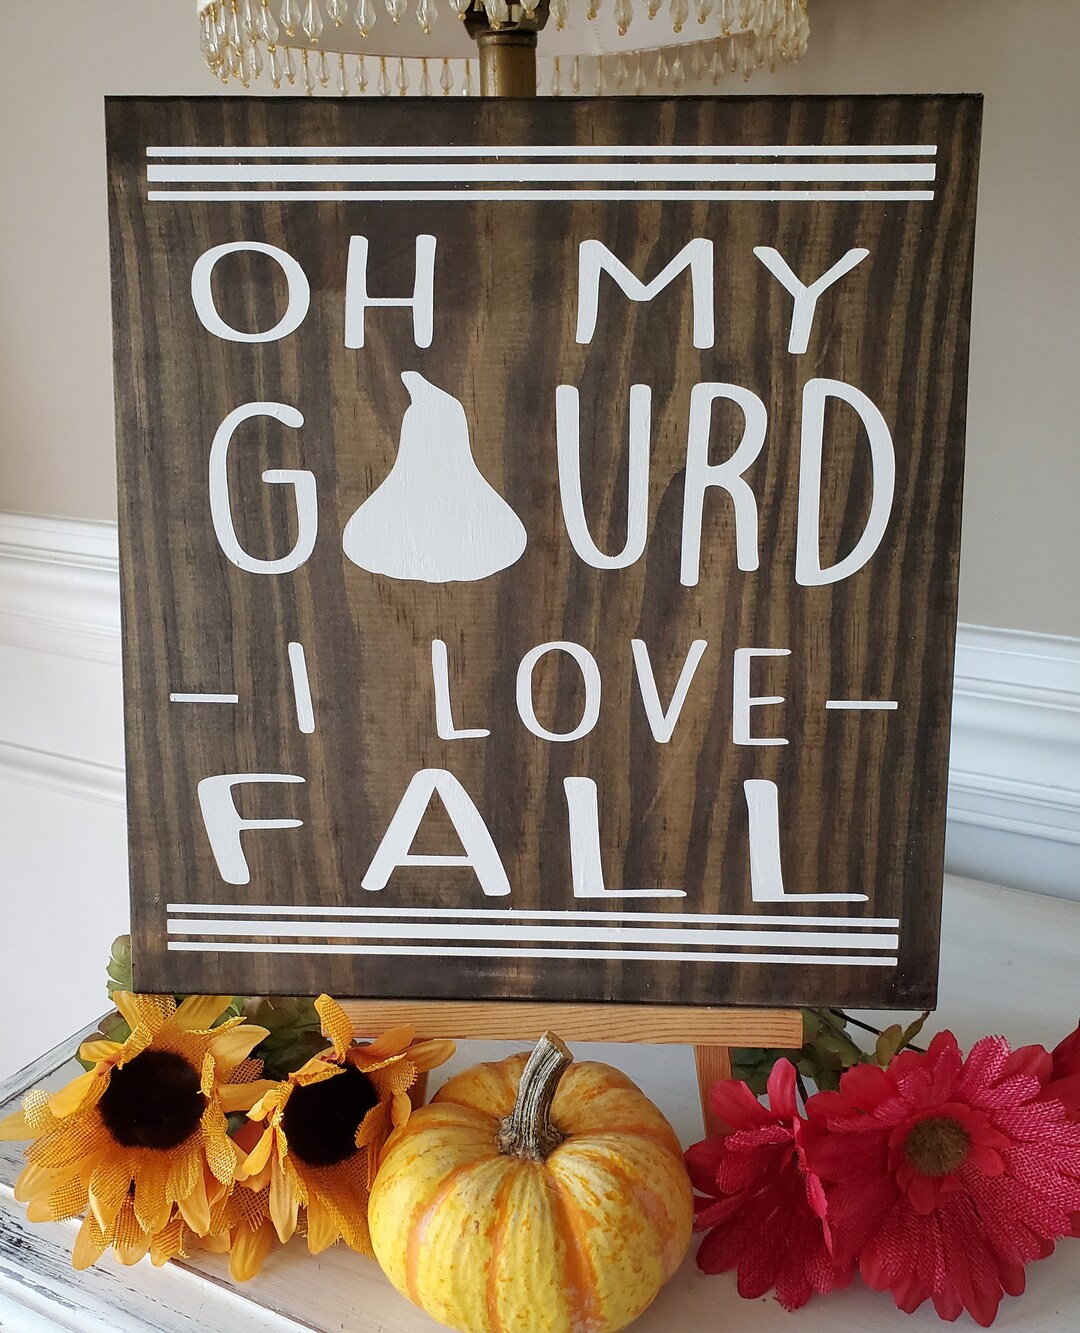 Oh My Gourd I Love Fall Wood Sign Halloween Decor - Etsy